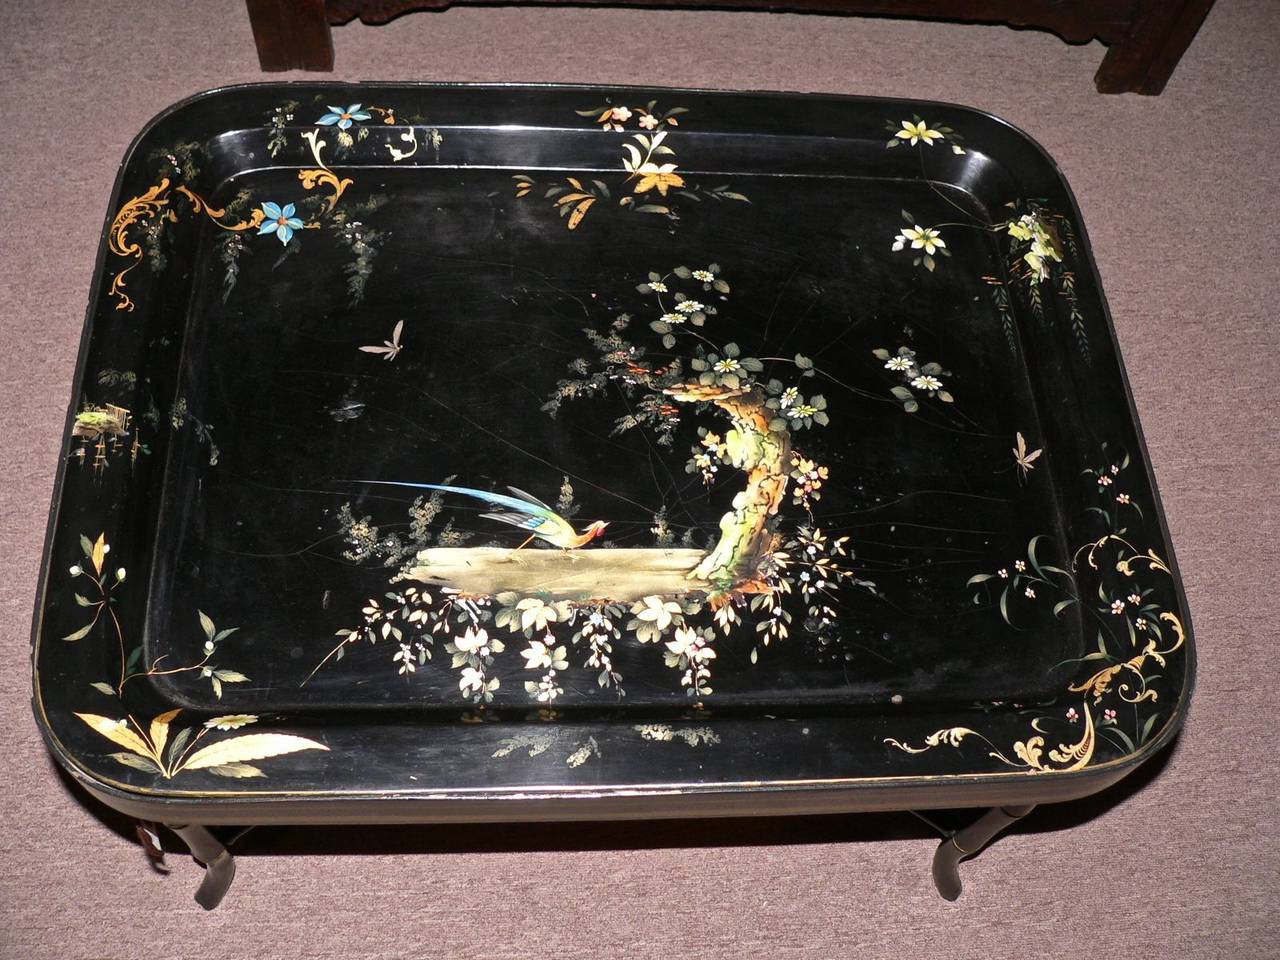 This black lacquer tray on stand was imported from England during the 1980s.
The tray is dates from about 1870 and has a bird of paradise motif. The stand was custom-made for the tray. Excellent condition.